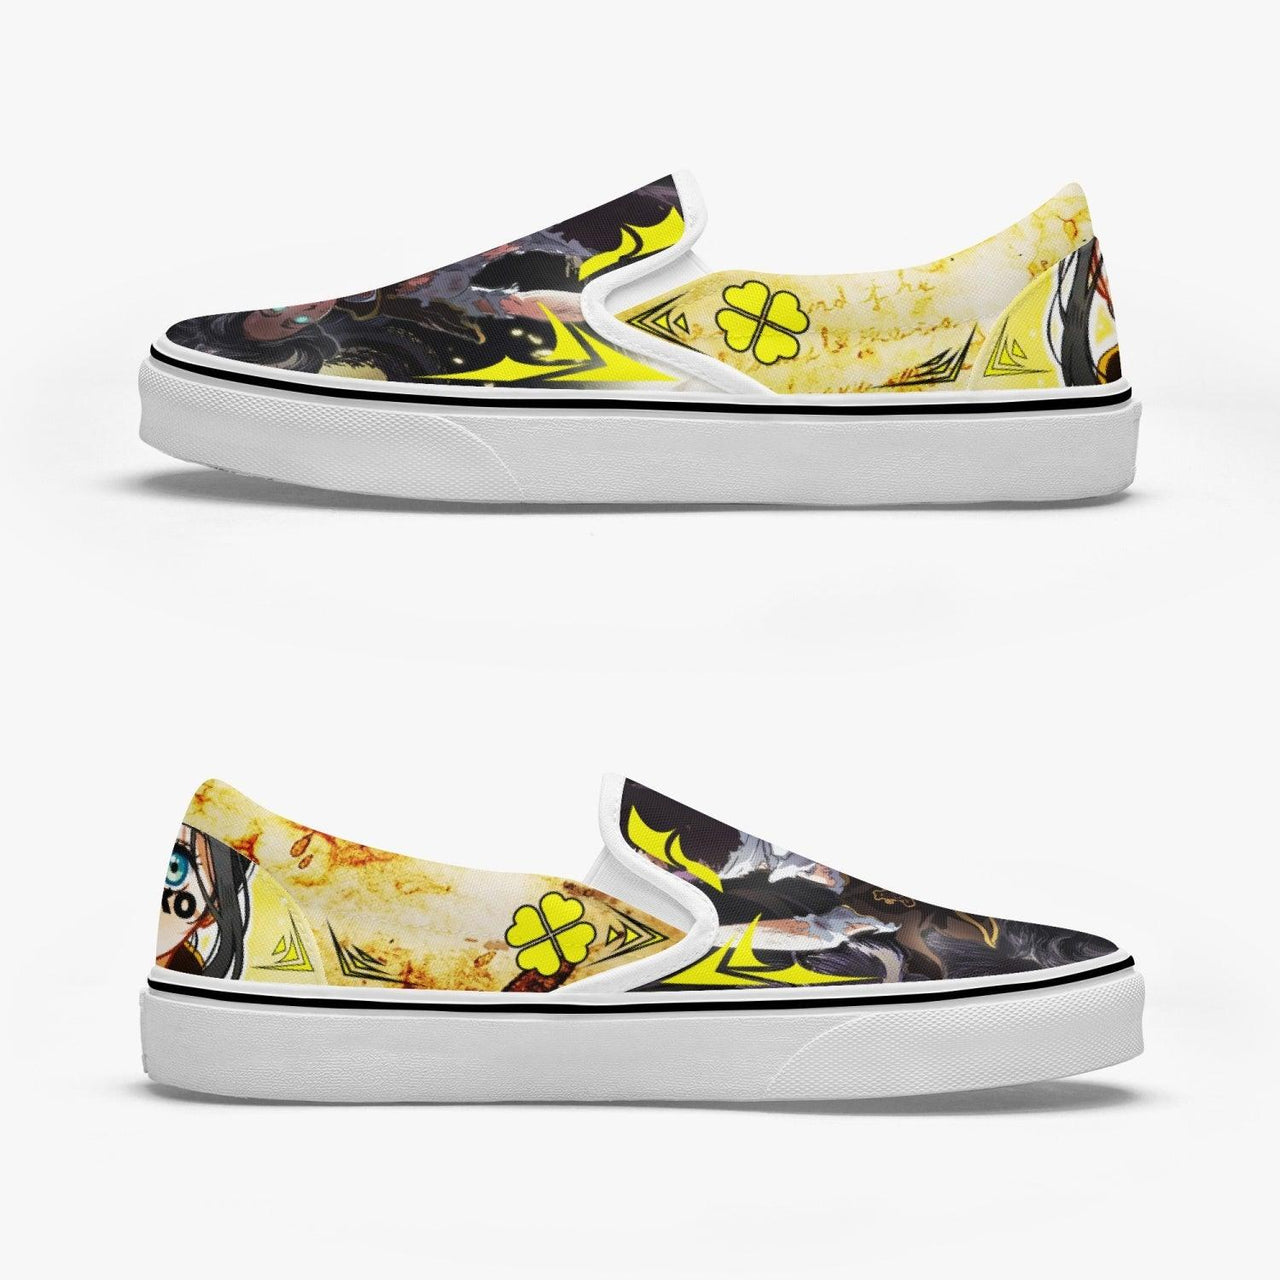 Black Clover Charmy Pappitson Slip Ons Anime Shoes _ Black Clover _ Ayuko